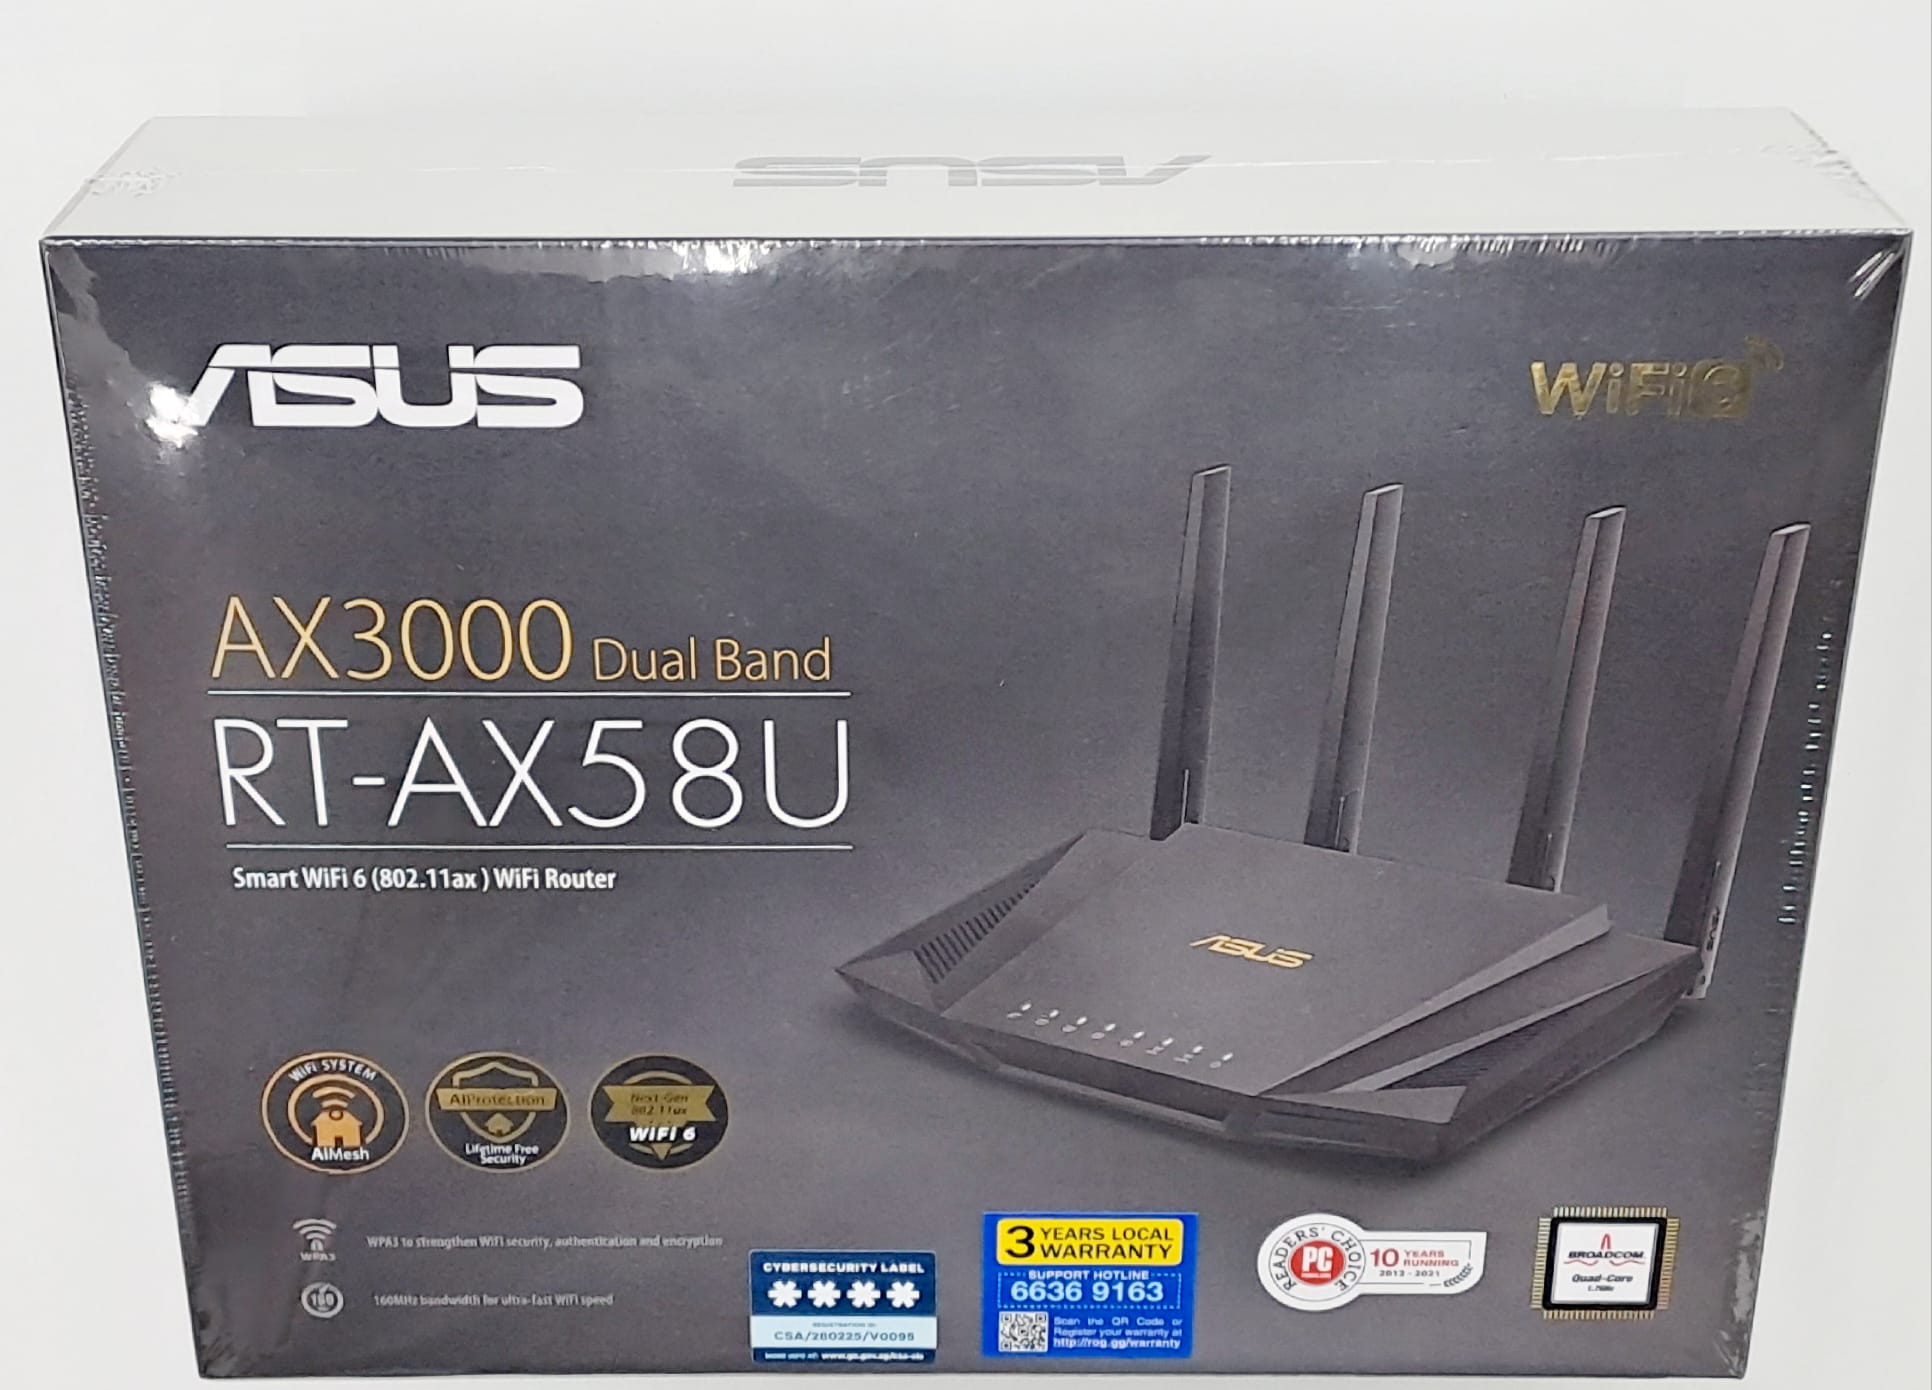 ASUS AX3000 Dual Band Smart WiFi 6 (802.11ax) Router